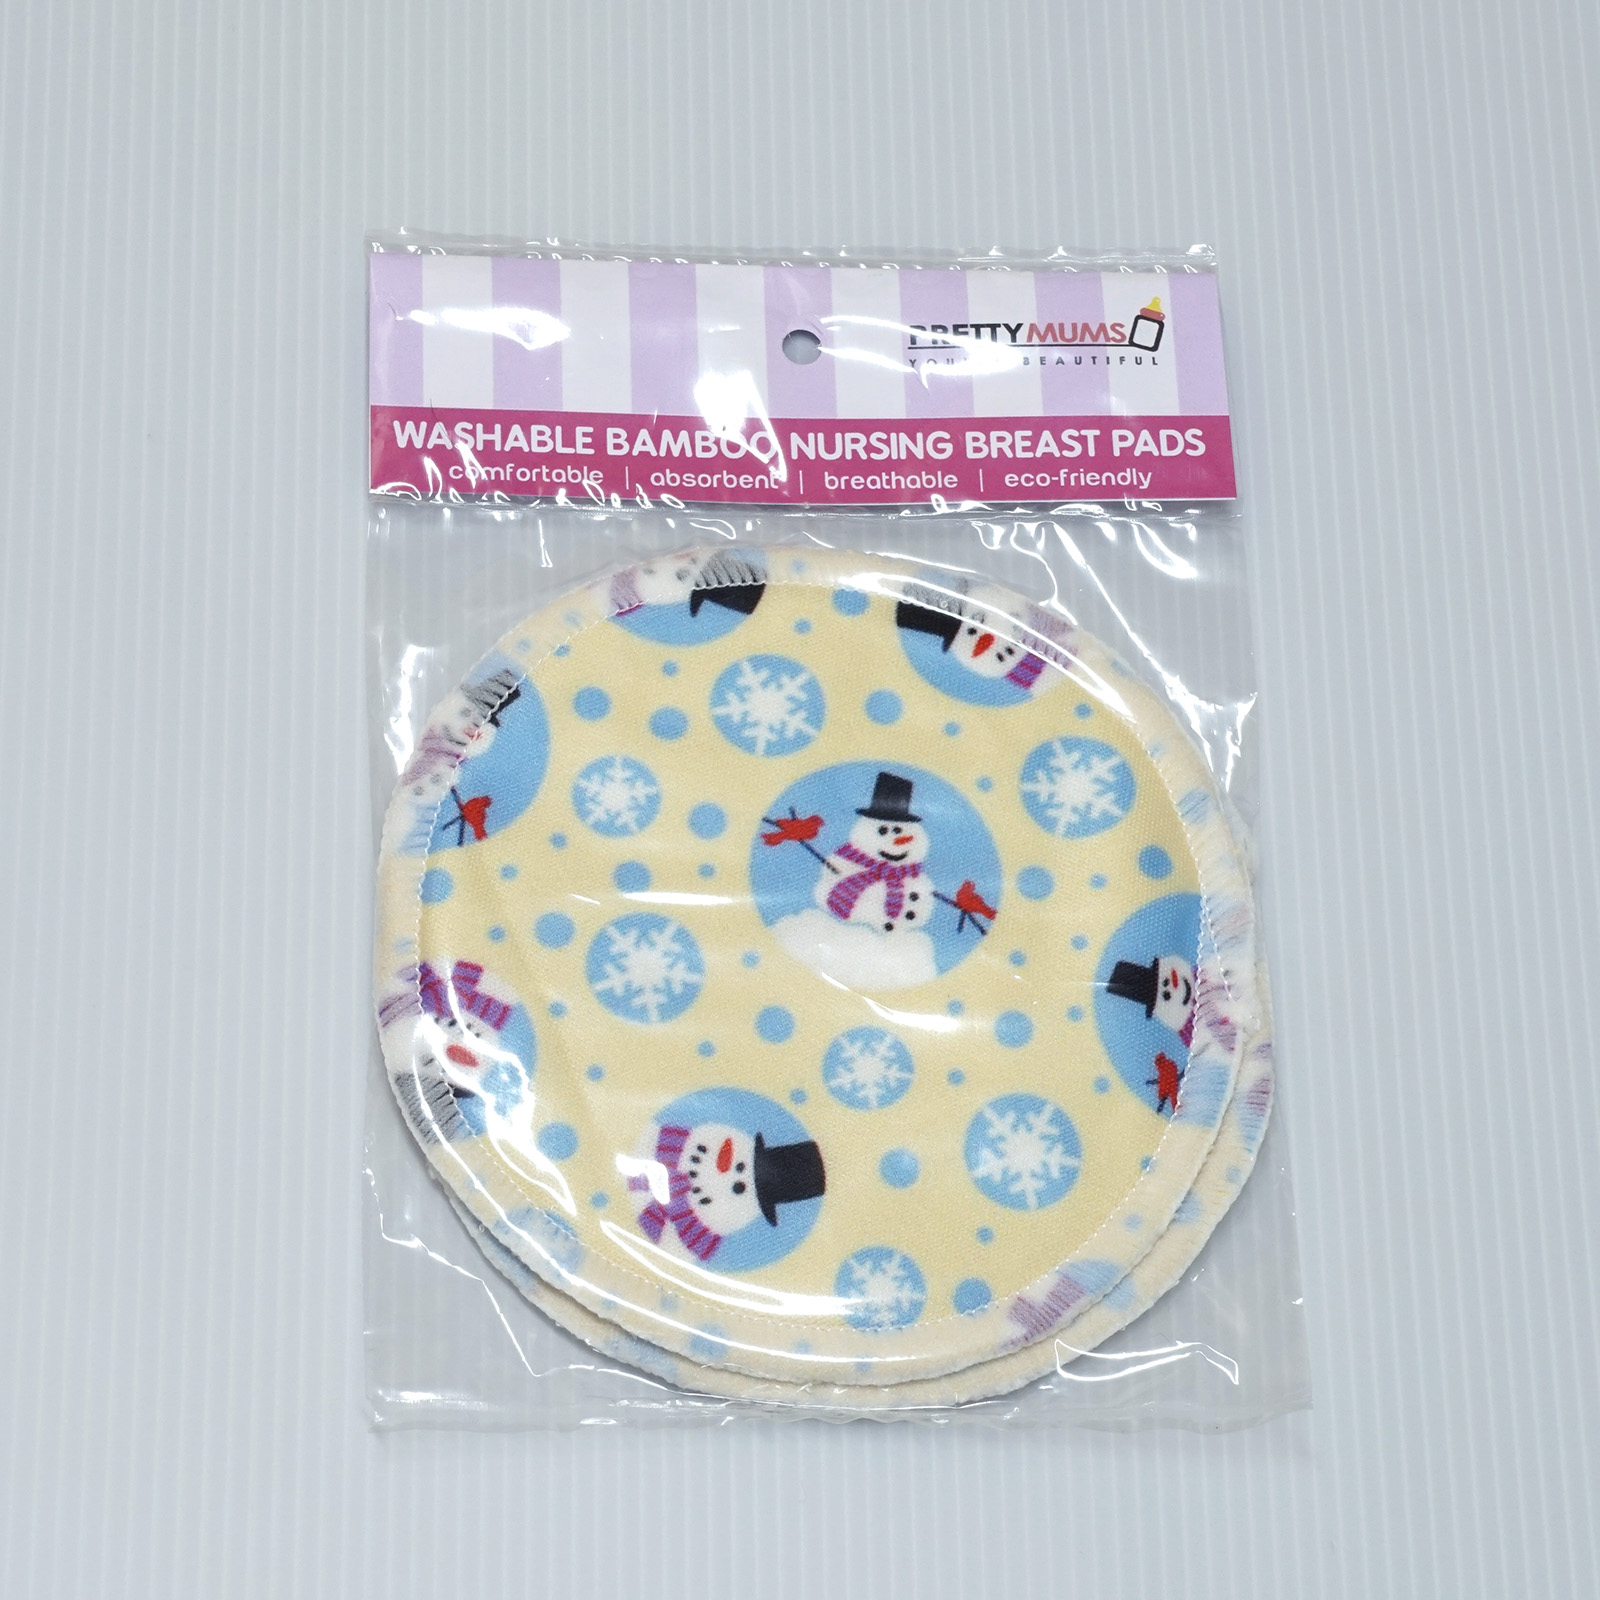 PrettyMums Washable Bamboo Nursing Pads (Snowman/Caterpillars/Bees/Sea Creatures - Coral)